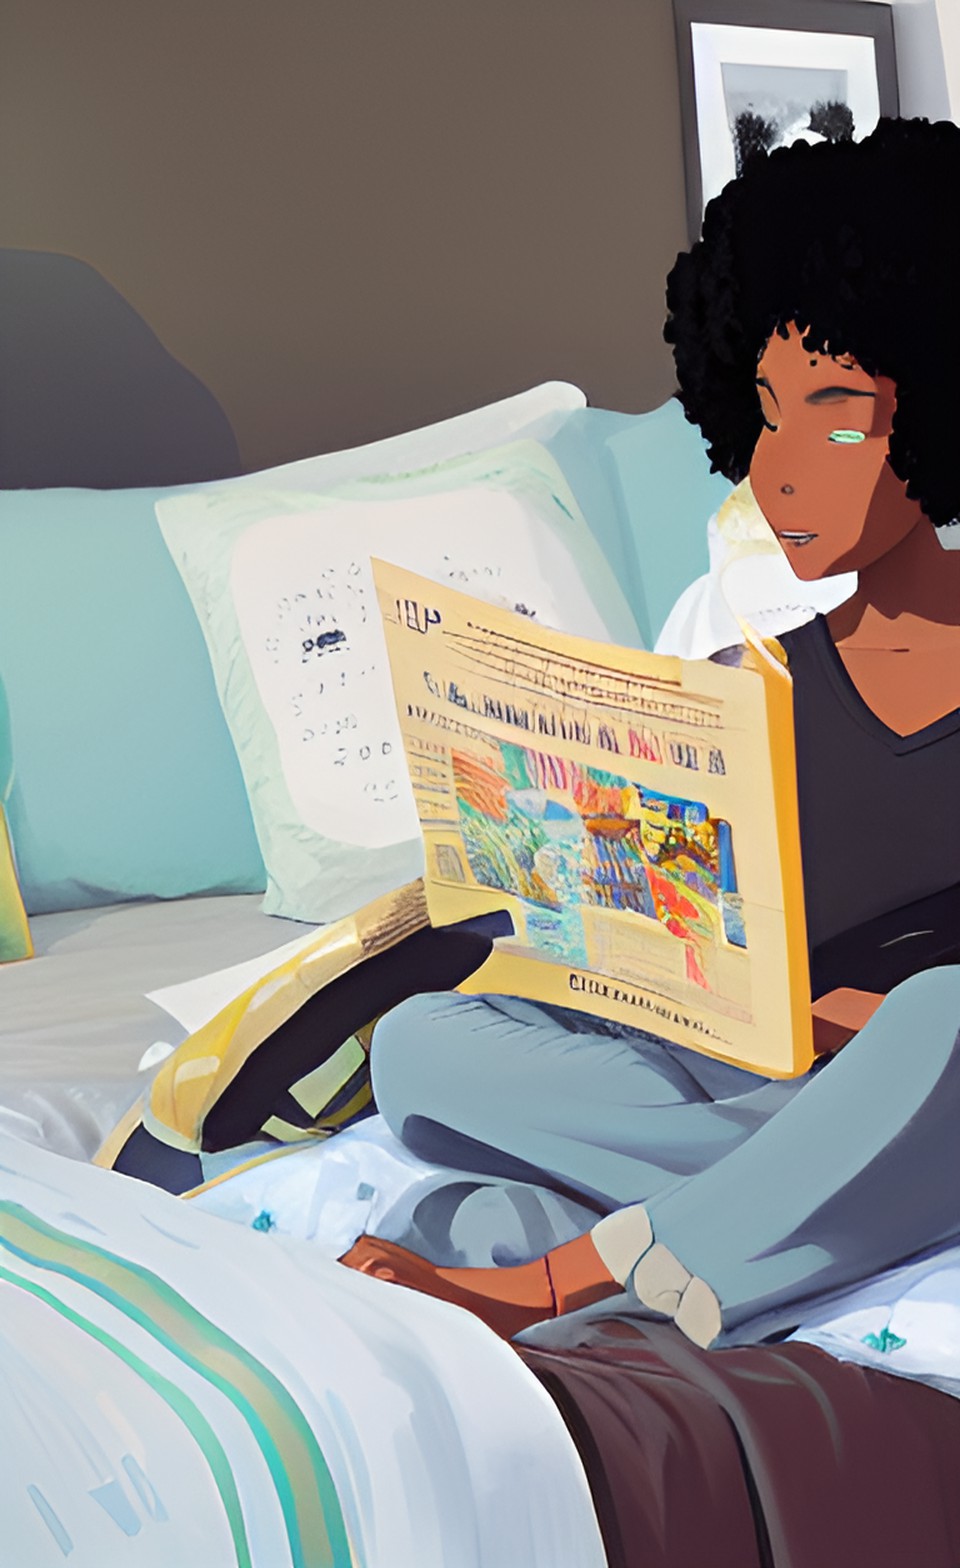 Banou Reading A Magazine On The Bed